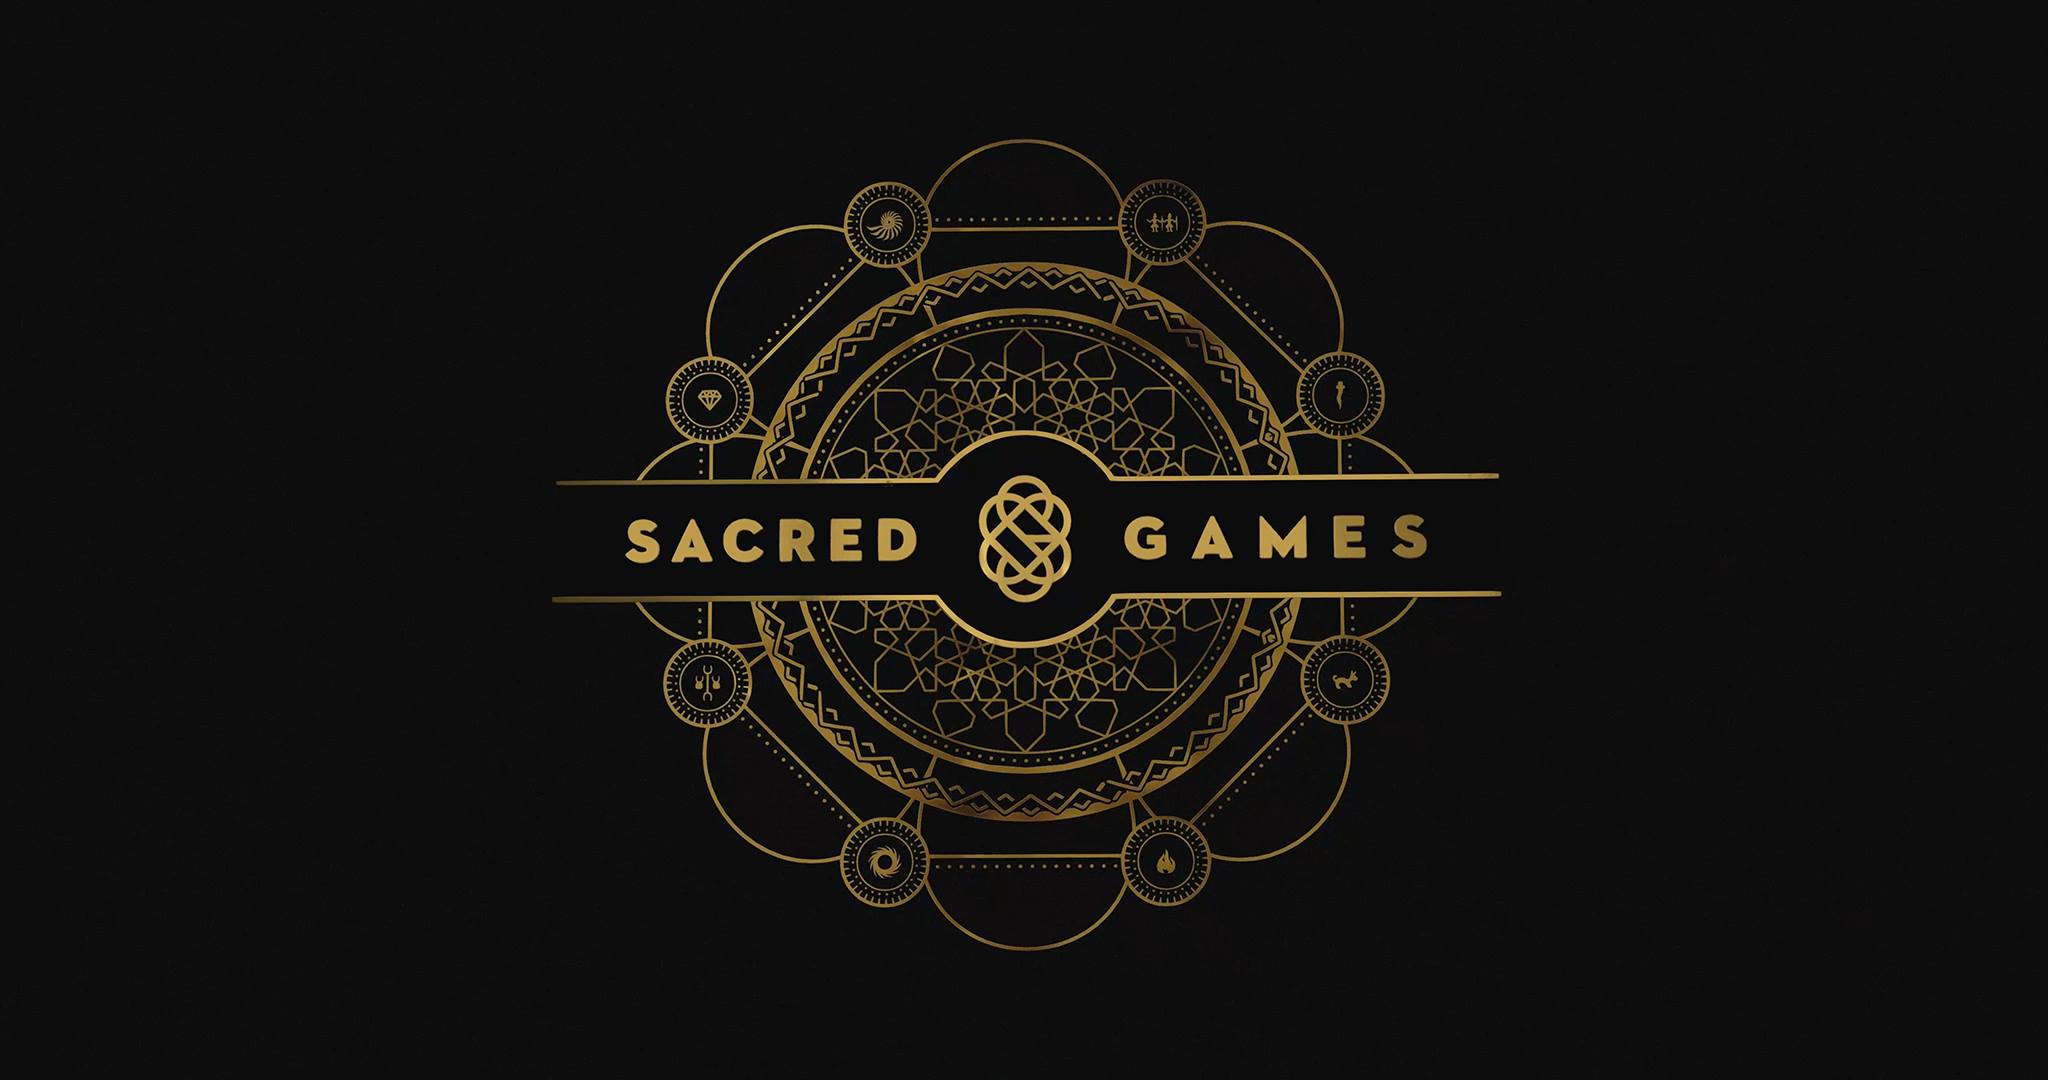 EXCLUSIVE: There's more to Sacred Games' Logo designs than meets